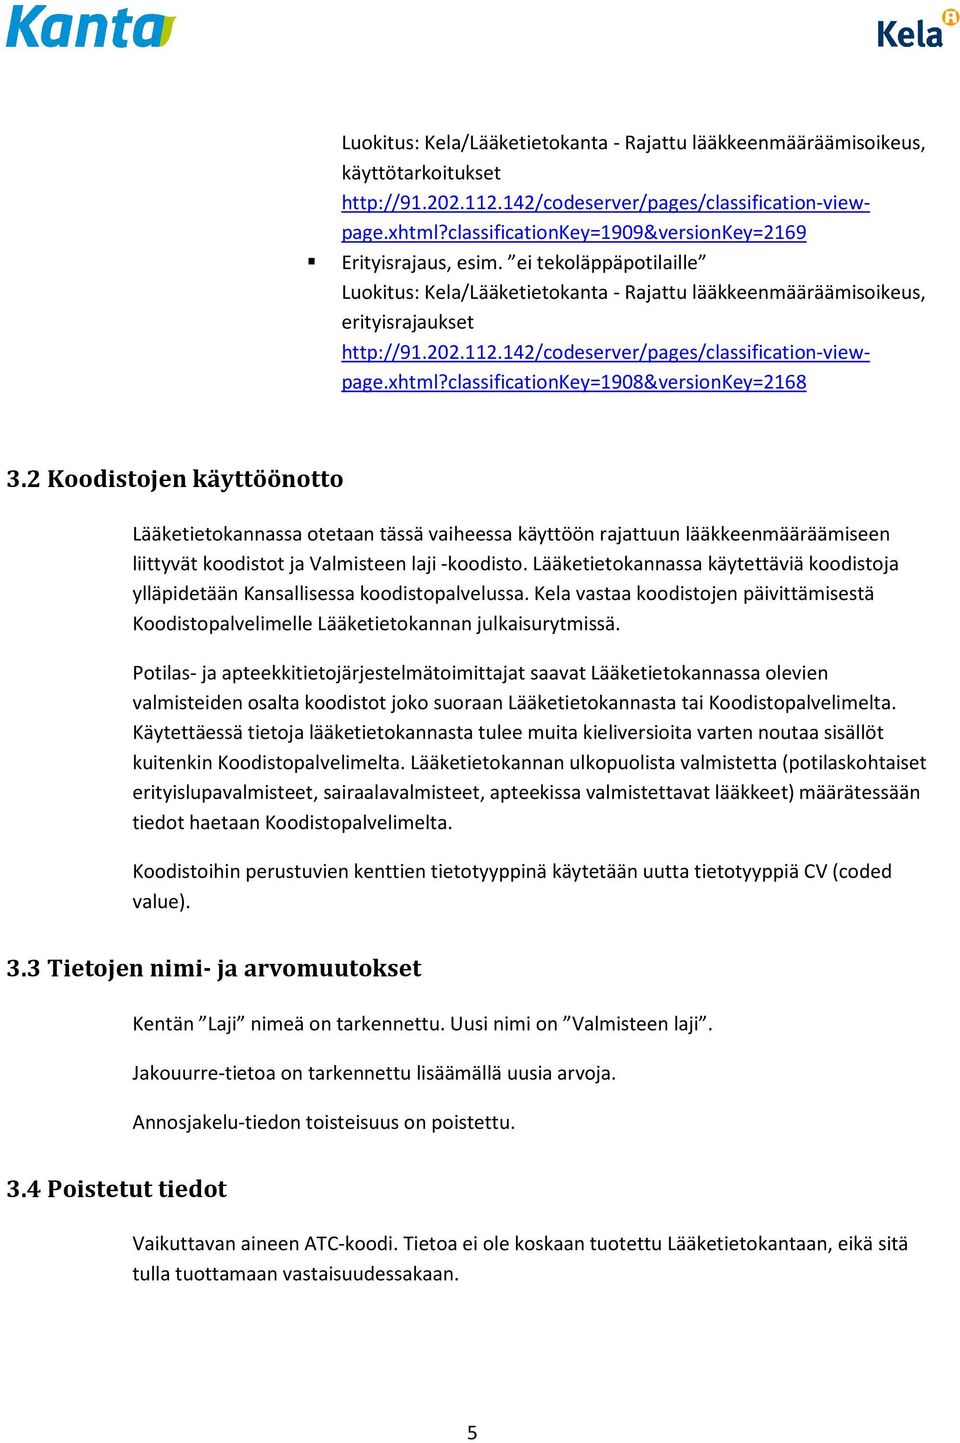 142/codeserver/pages/classification-viewpage.xhtml?classificationkey=1908&versionkey=2168 3.